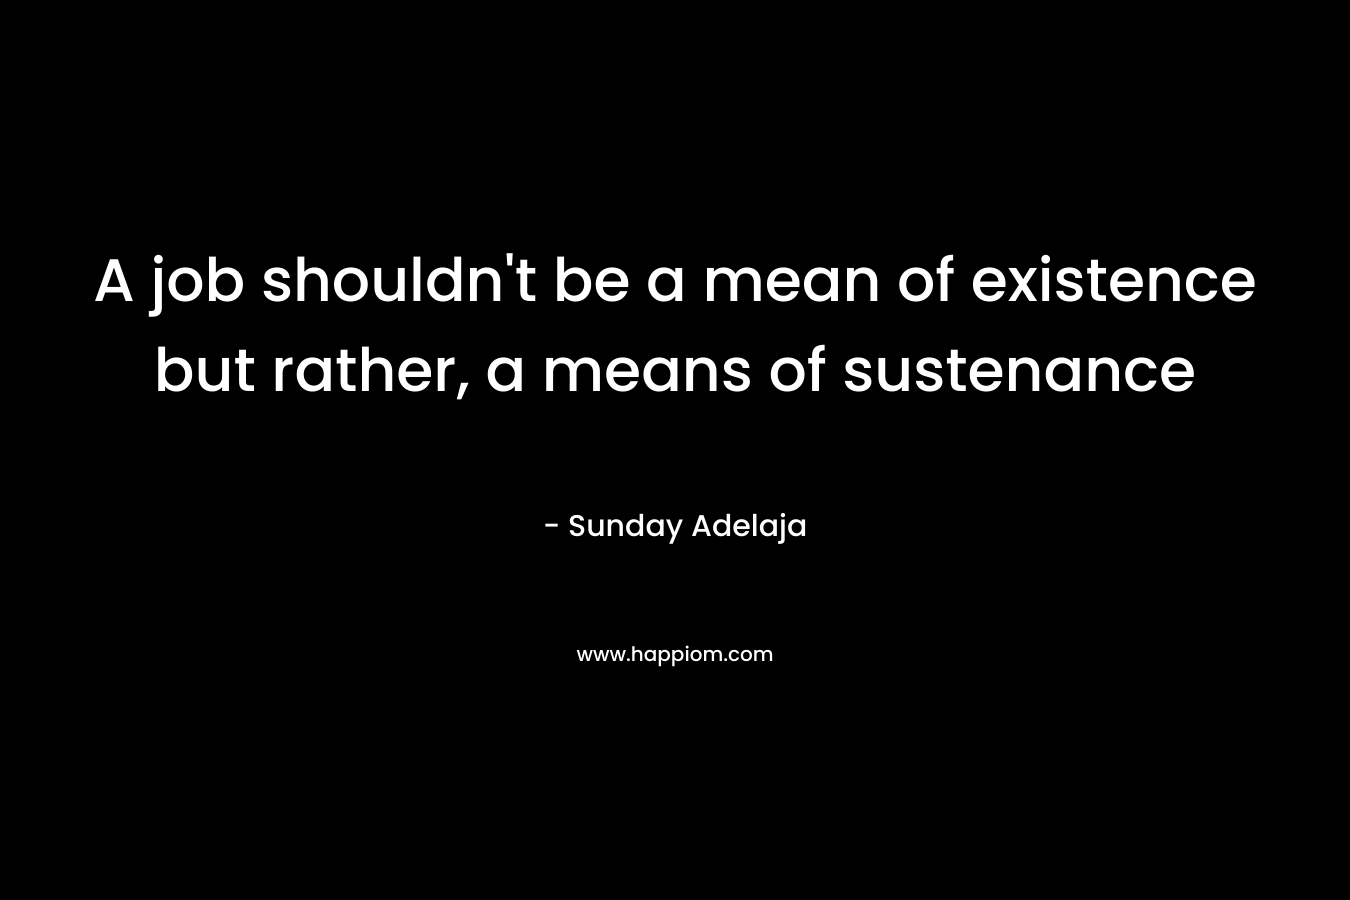 A job shouldn't be a mean of existence but rather, a means of sustenance